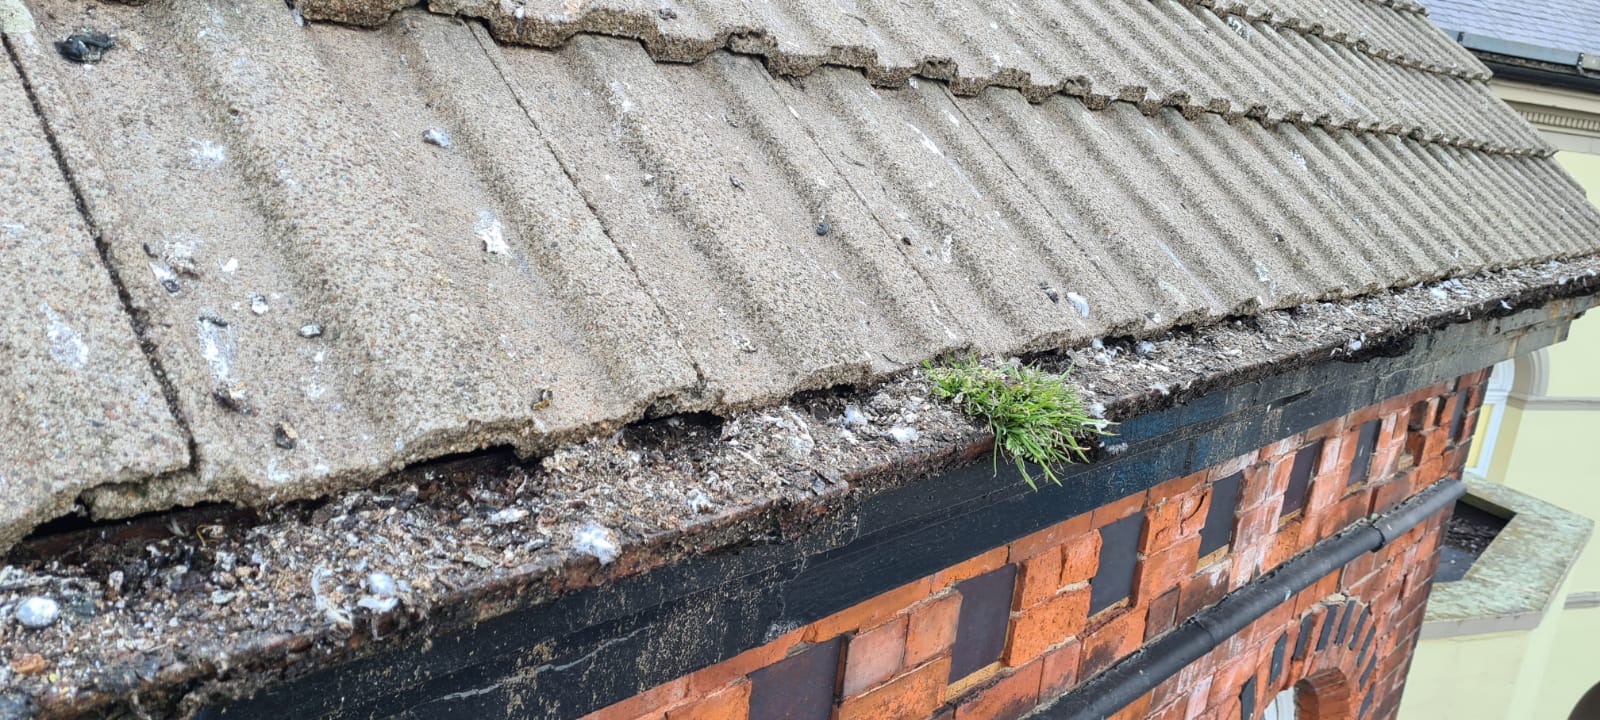 Gutter full of pigeon droppings